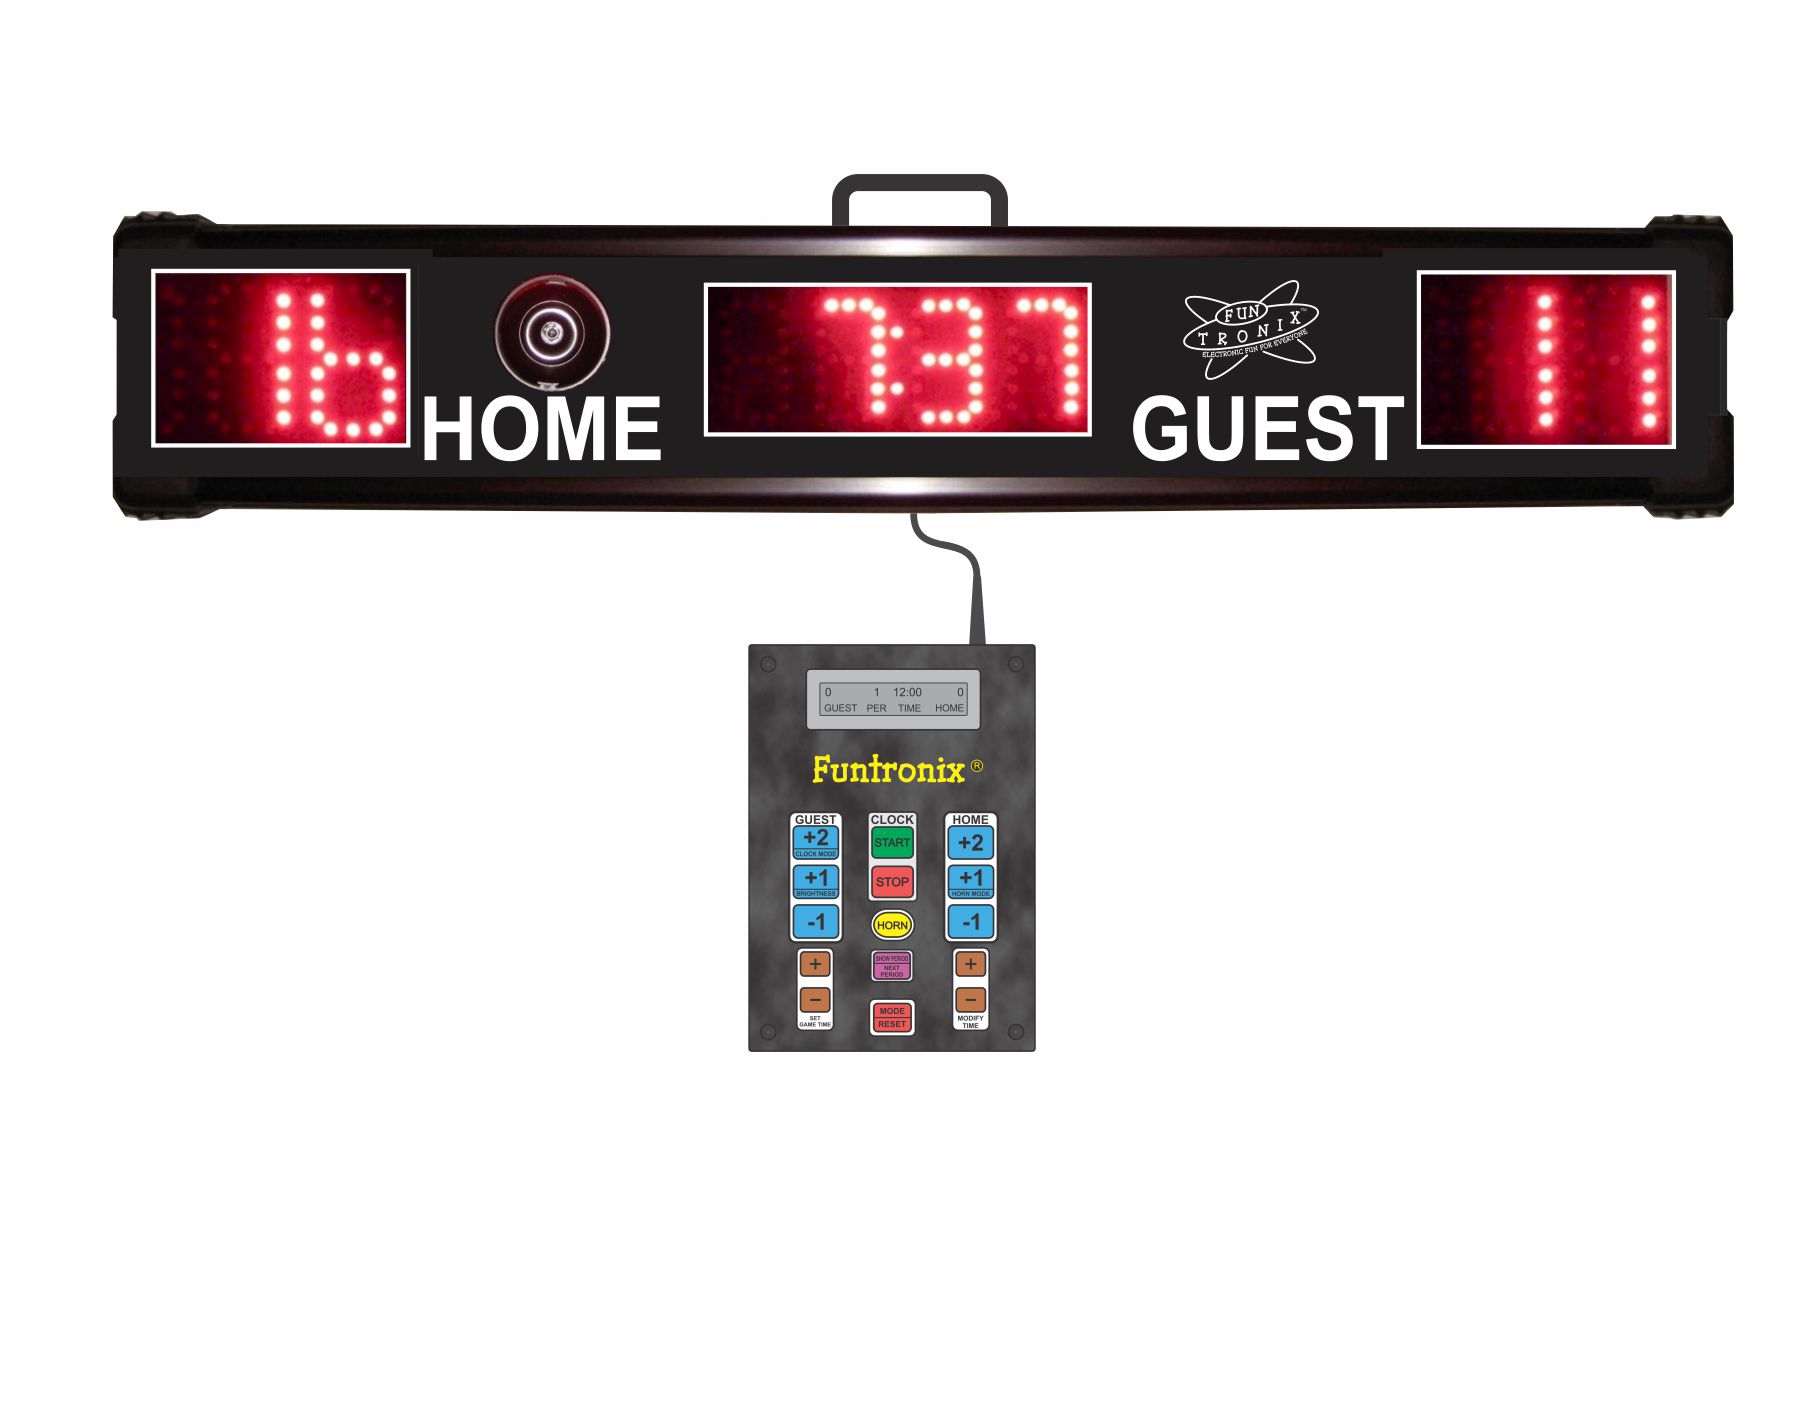 Portable Scoreboard front view with keypad